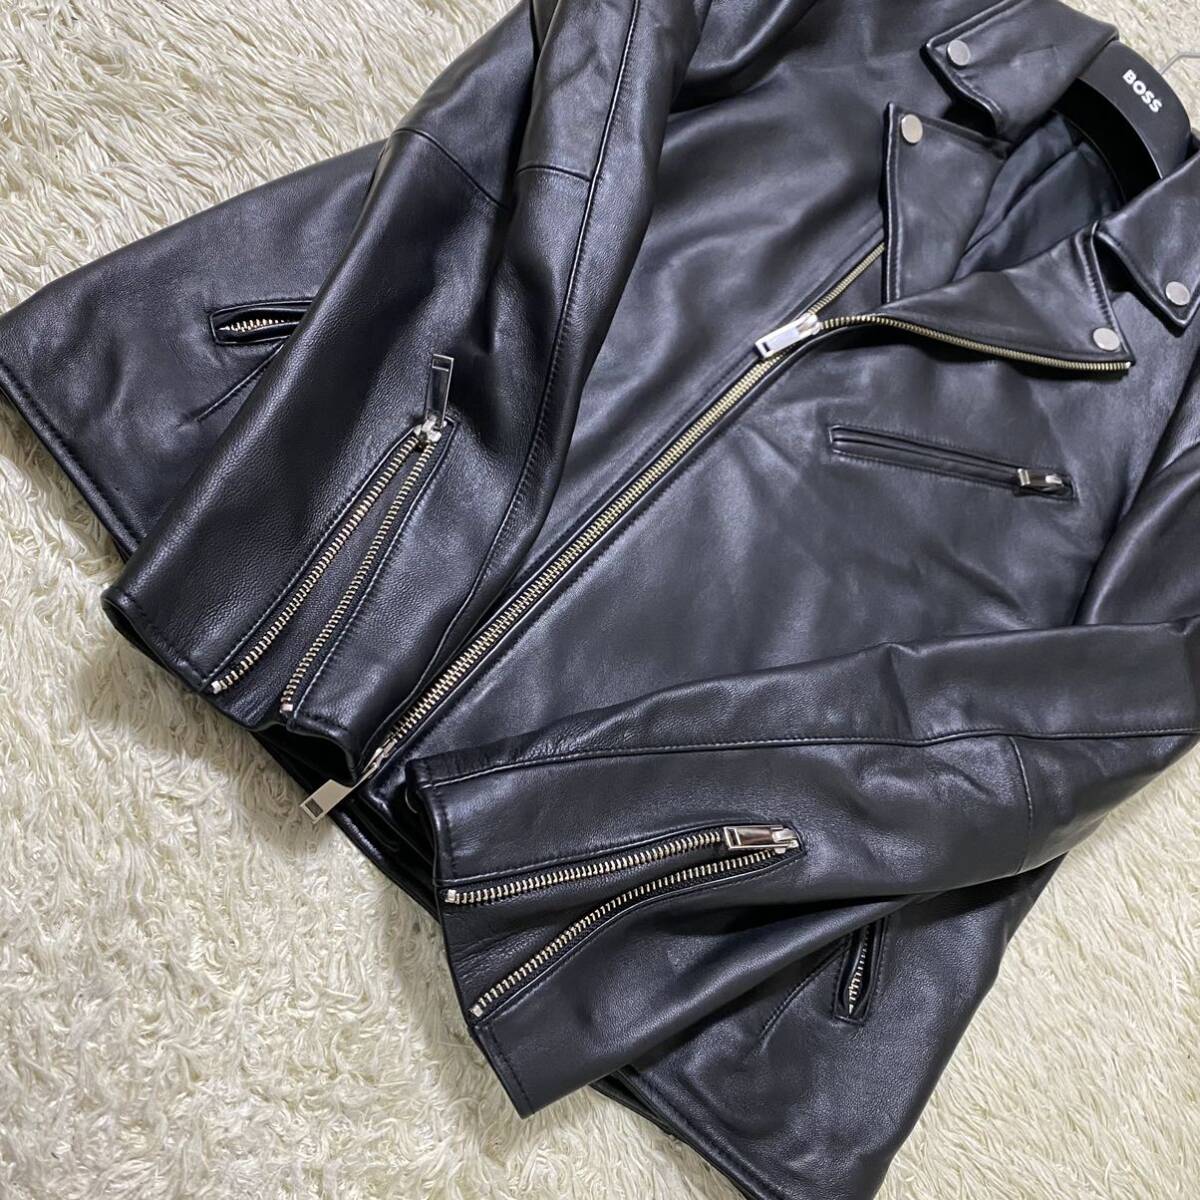 1 jpy [ stereo . Dio s[ unused class ]STUDIOUS Double Rider's leather jacket men's ram leather black L rank large size made in Japan . cloth ]